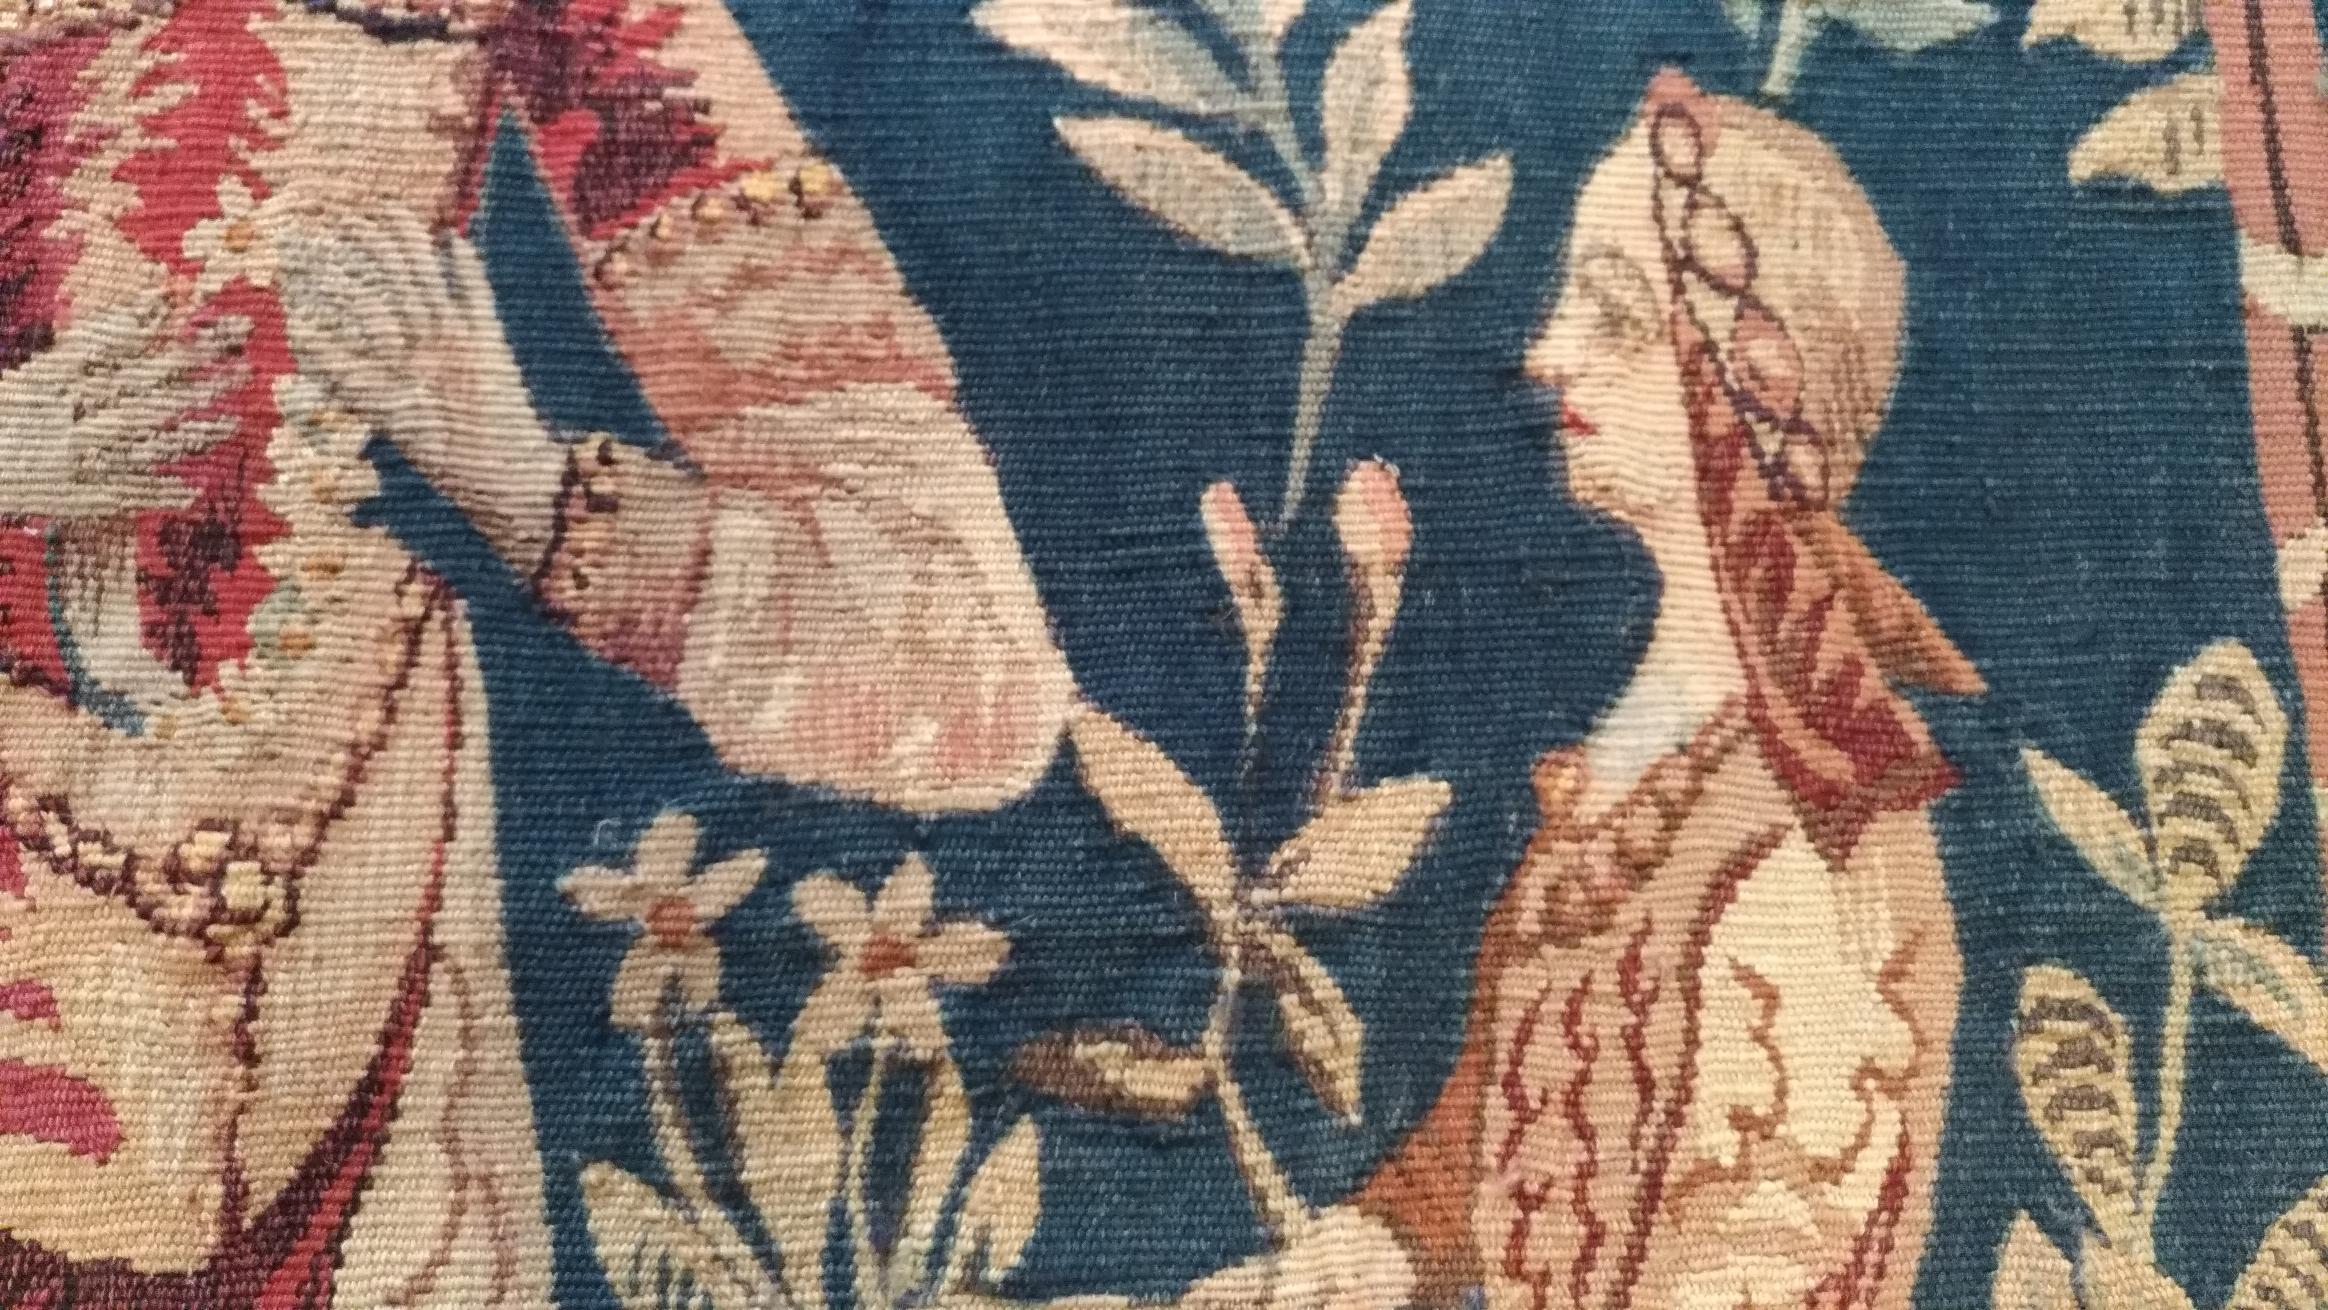 French  1107 - Aubusson Tapestry 19th Century Lady with the Unicorn  For Sale